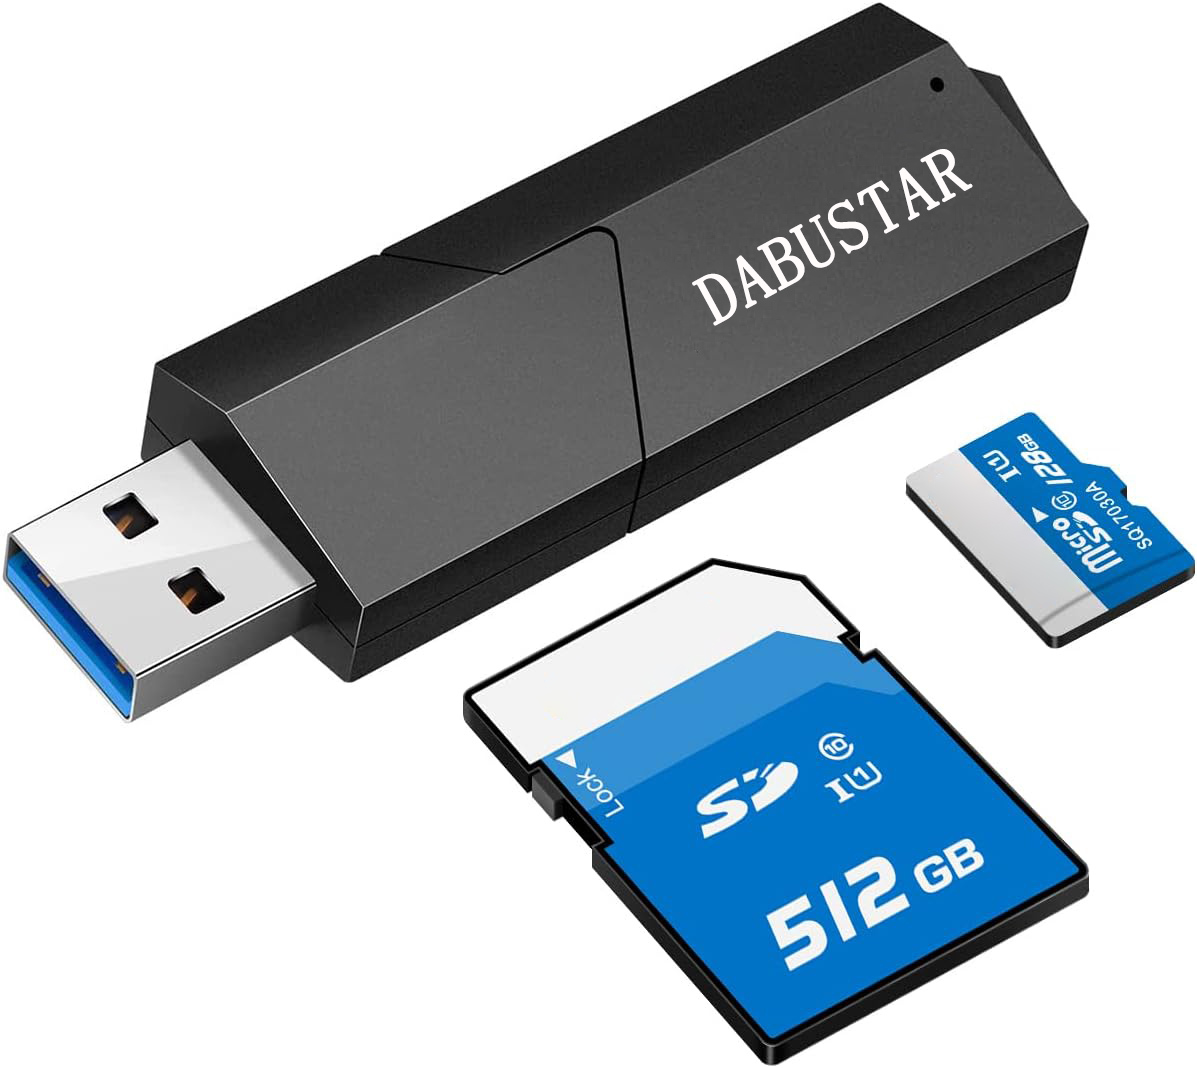 DABUSTAR  USB card readers C307 USB 3.0 Portable Card Reader for SD, SDHC, SDXC, MicroSD, MicroSDHC, MicroSDXC, with Advanced All-in-One Design